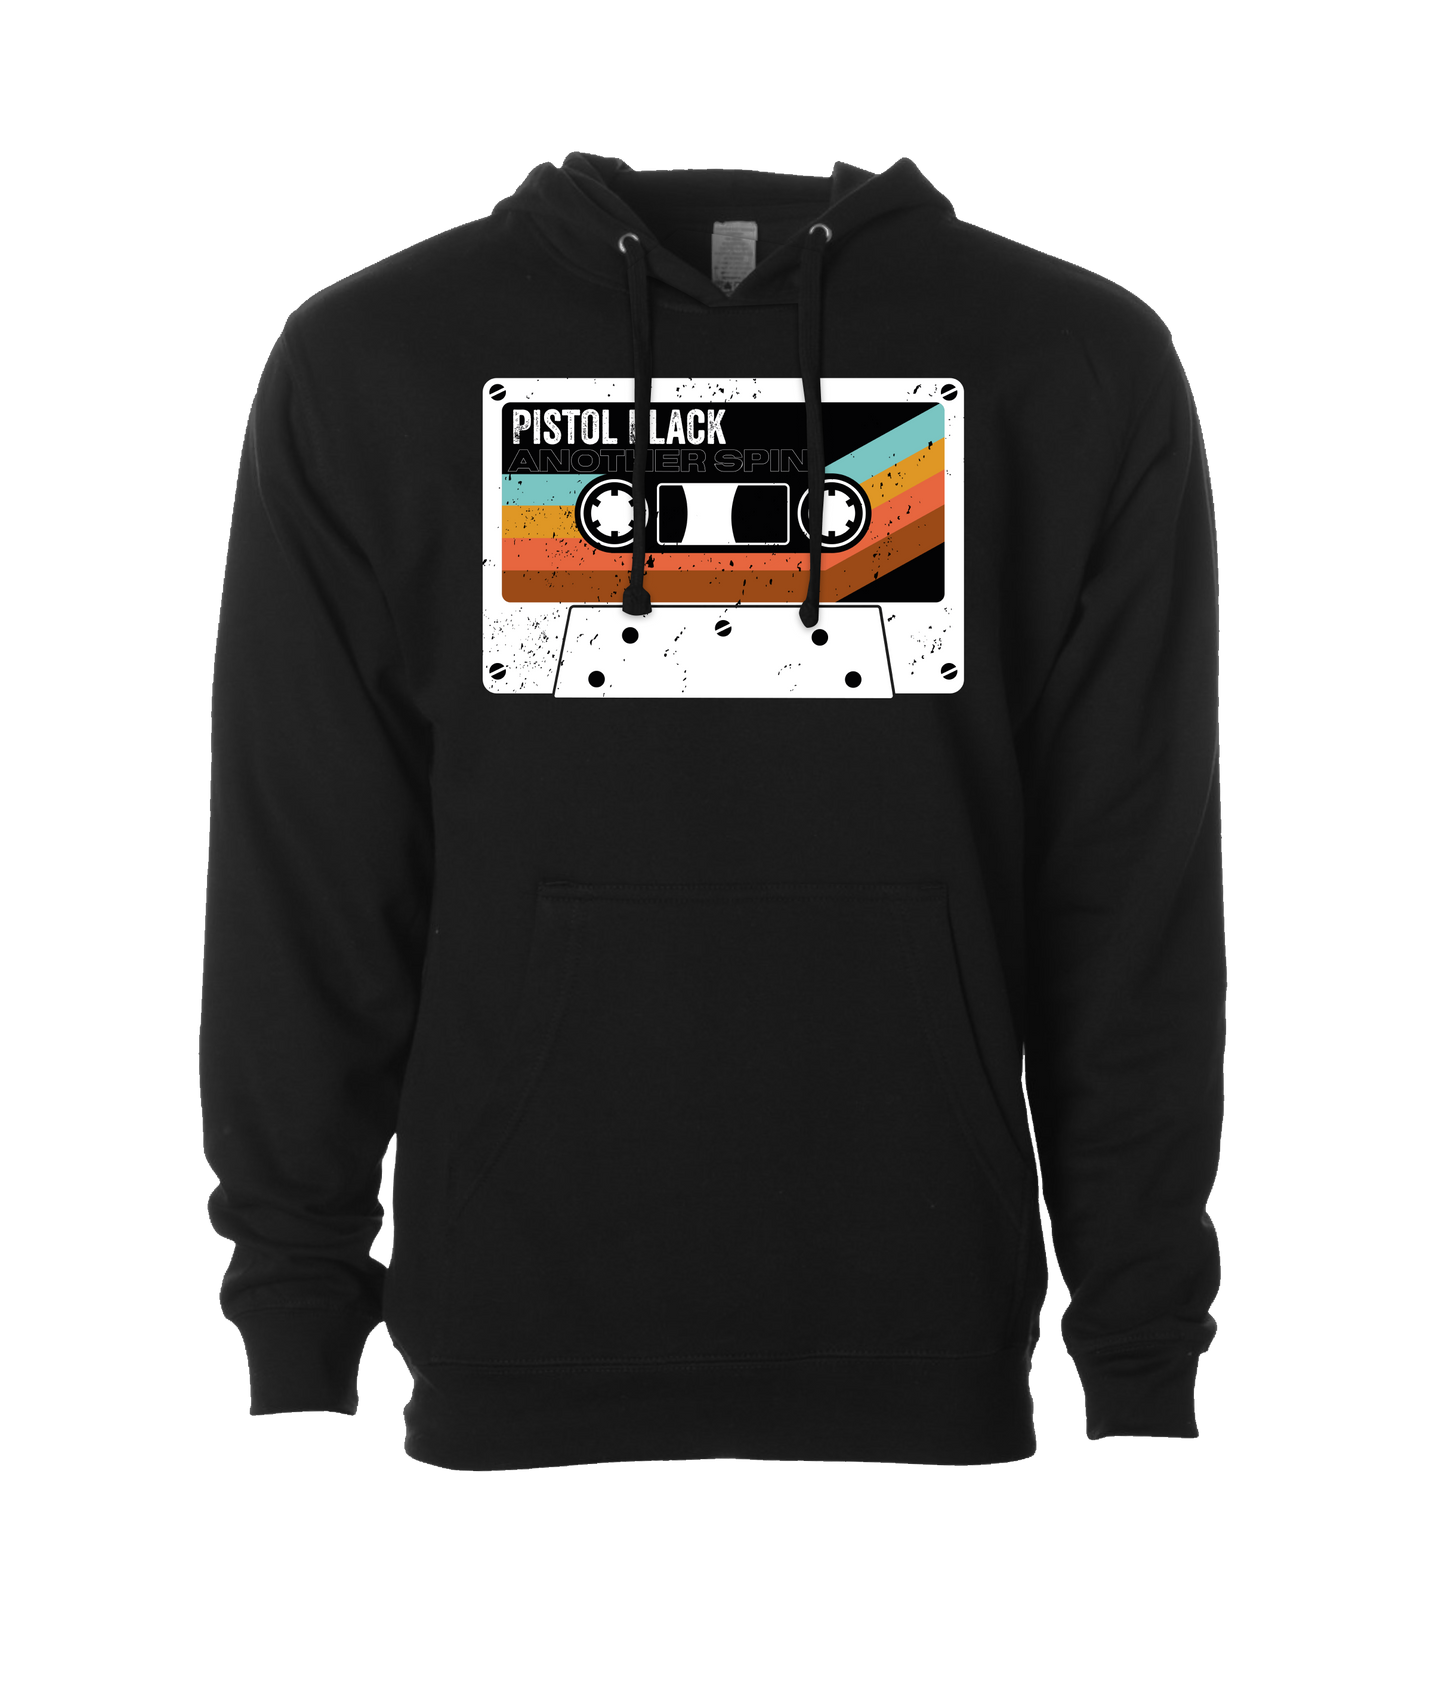 Pistol Black - Another Spin - Black Hoodie